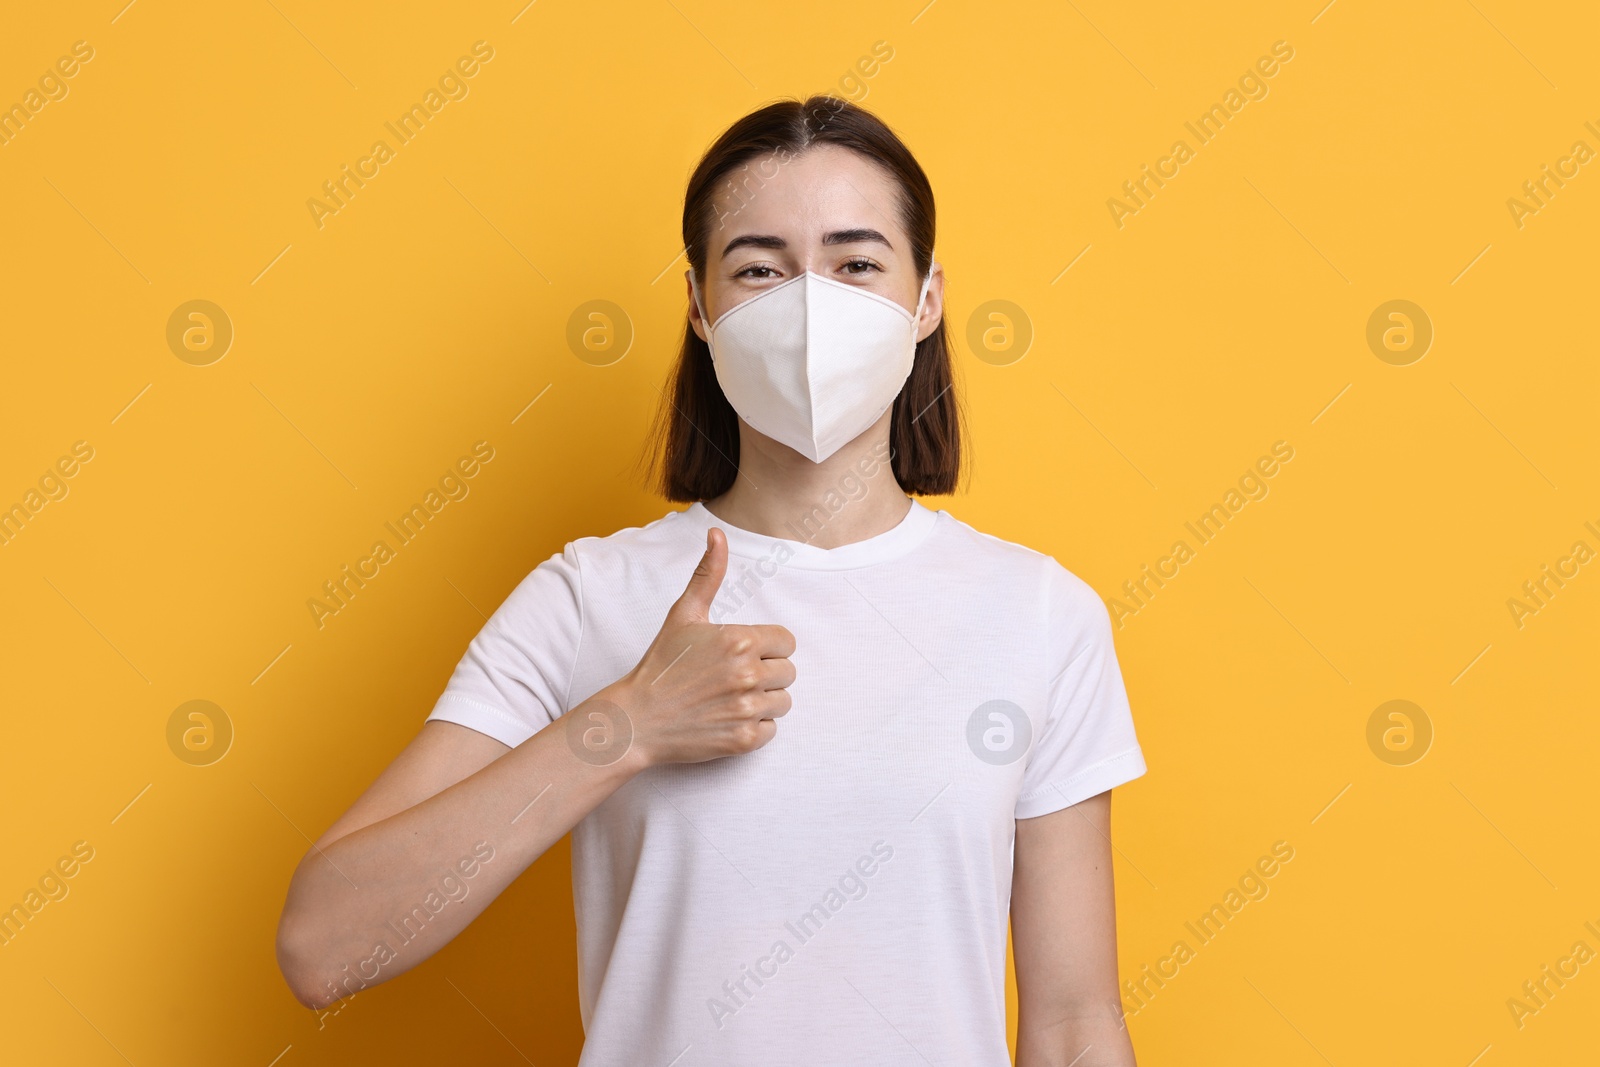 Photo of Woman in respirator mask showing thumbs up on orange background